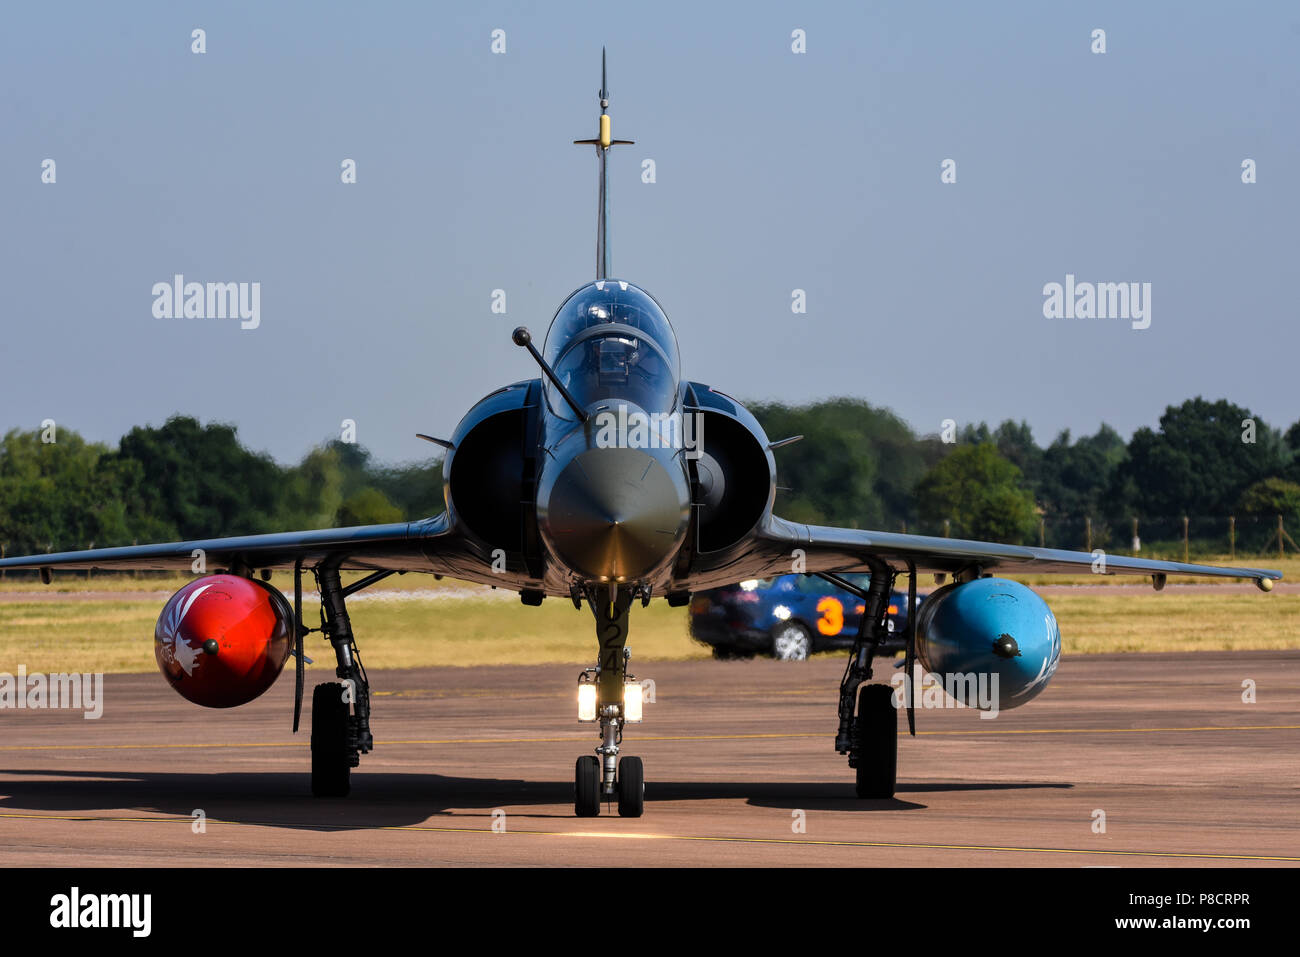 French Air Force Couteau Delta Tactical Display Mirage 2000 fighter jet at Royal International Air Tattoo, RIAT 2018, RAF Fairford. Stock Photo